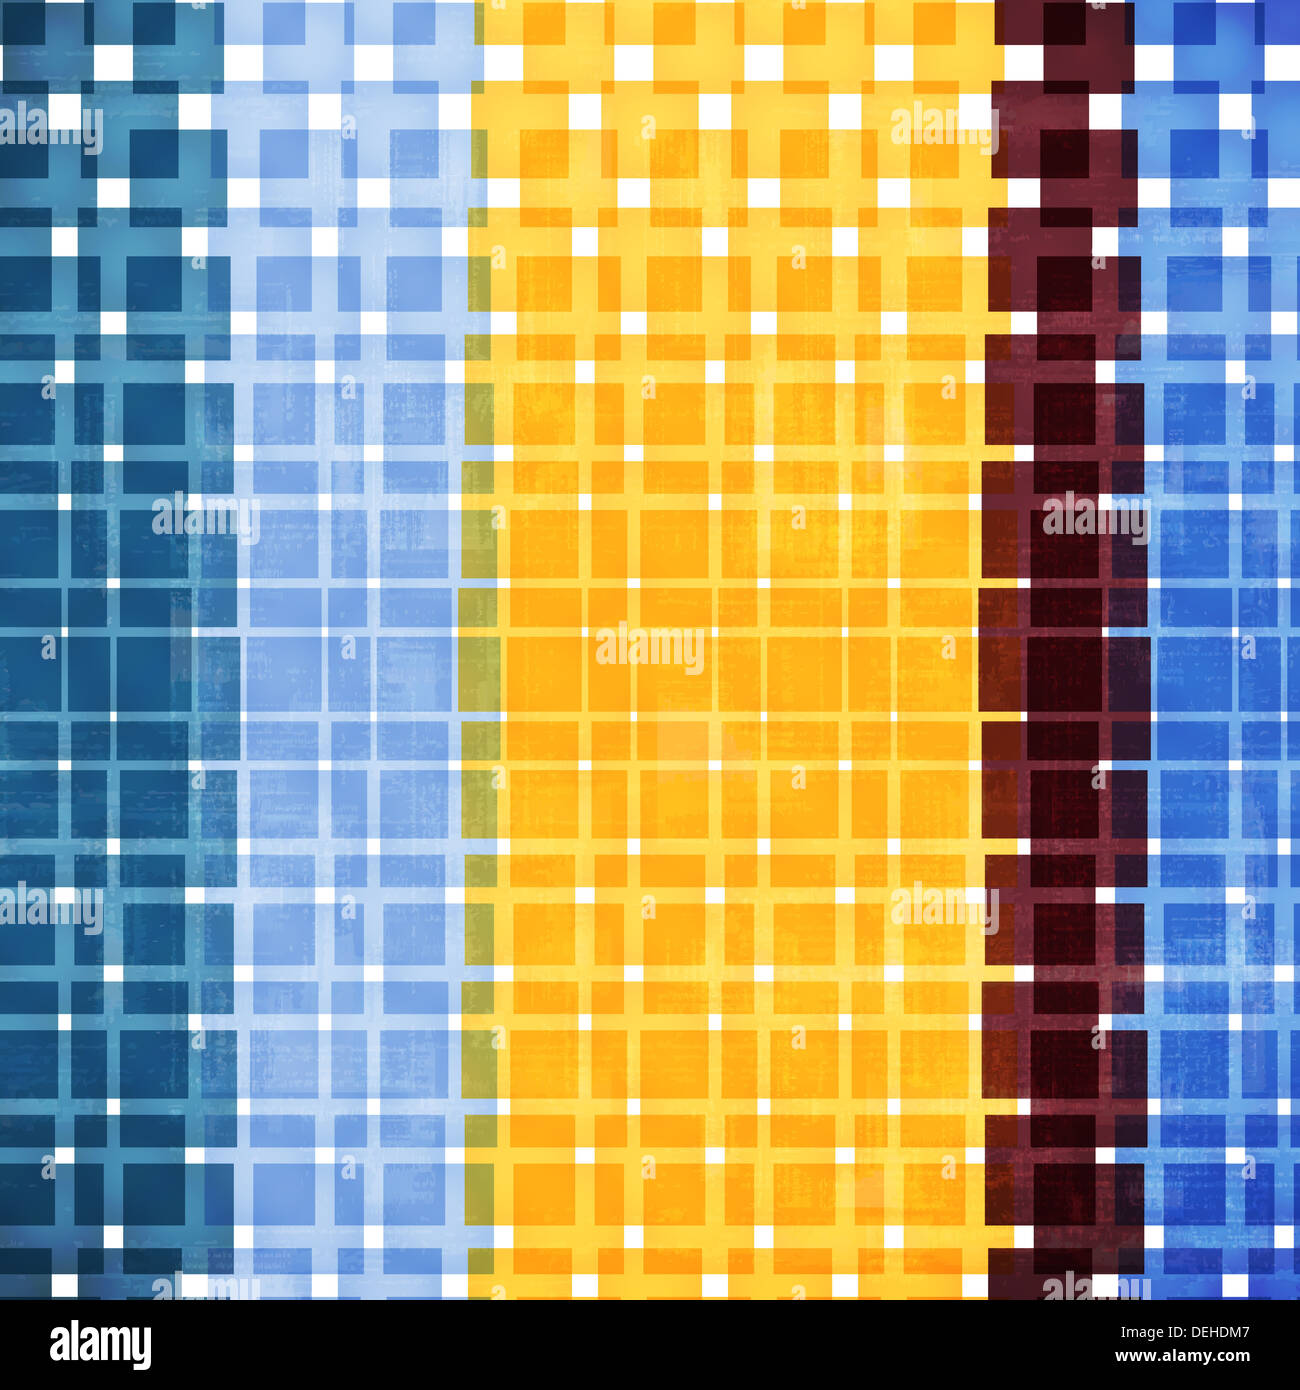 new abstract wallpaper with colored squares can use like grunge background Stock Photo